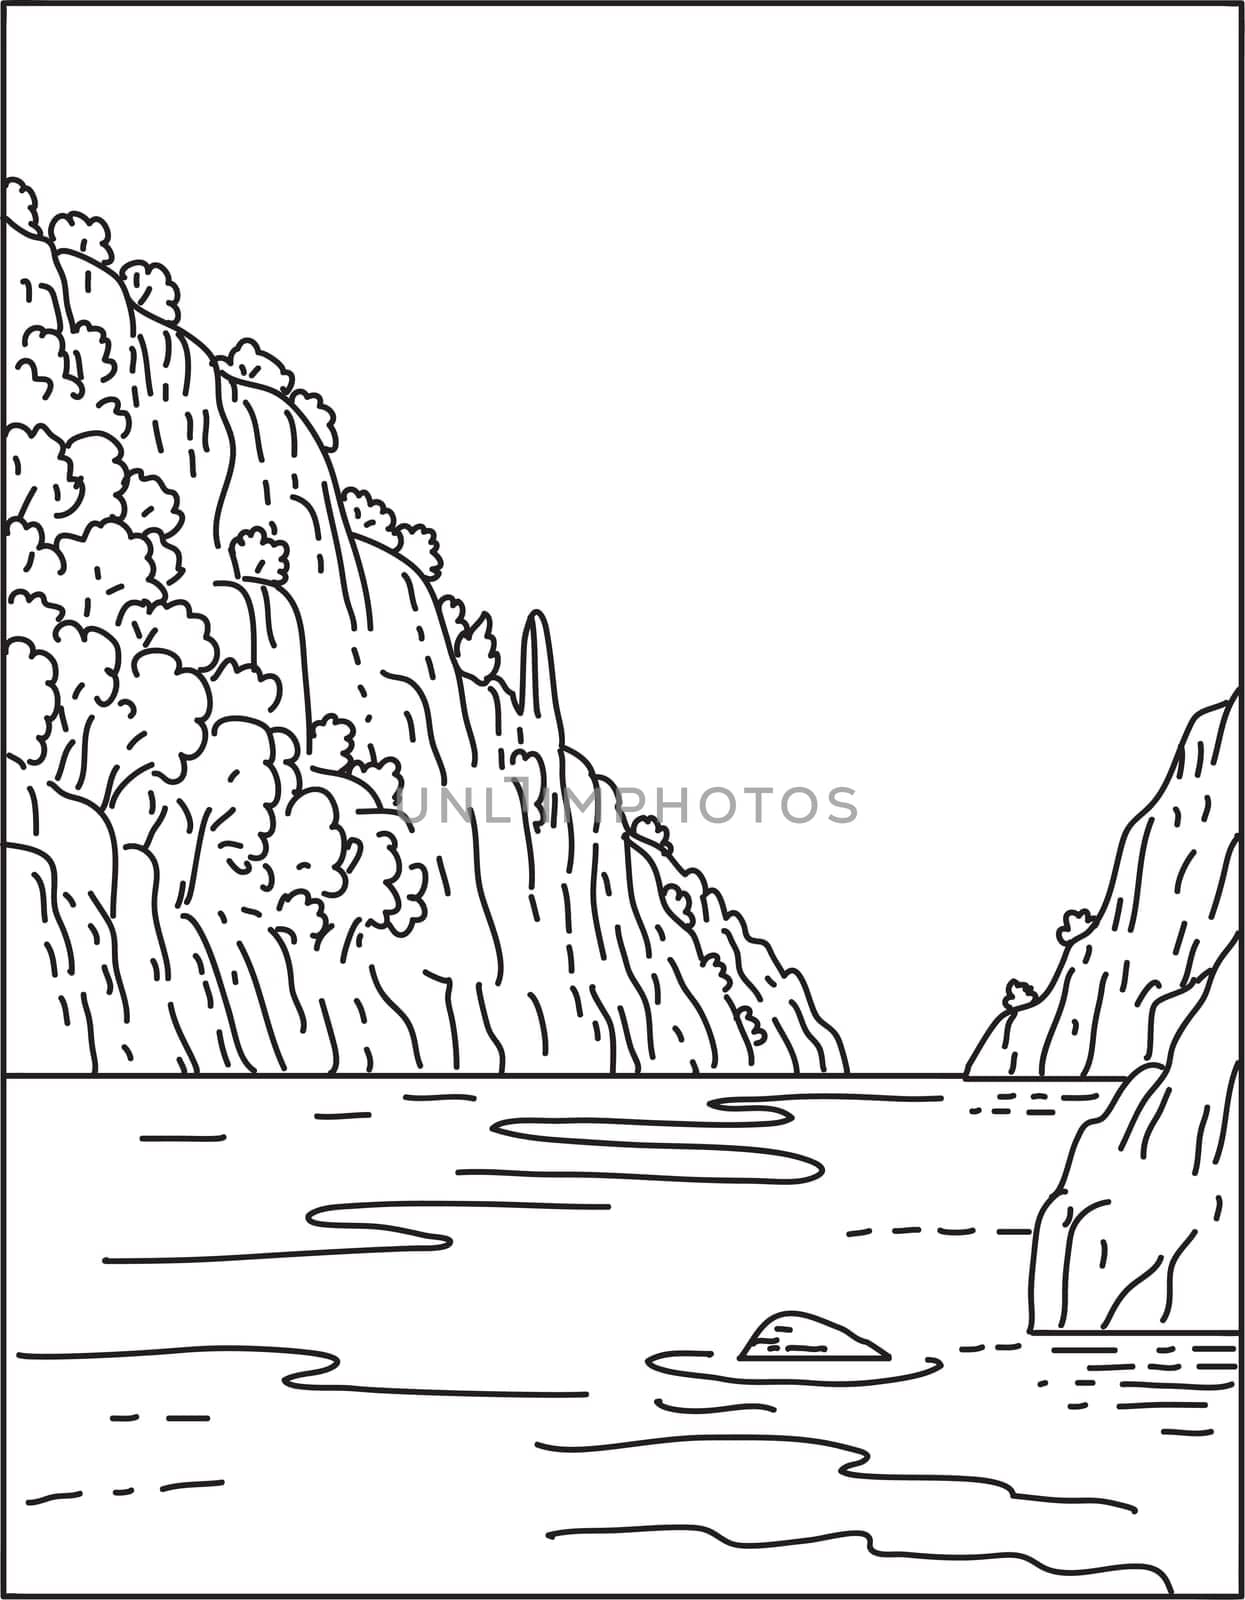 Calanques National Park in Southern France Mono Line Art by patrimonio